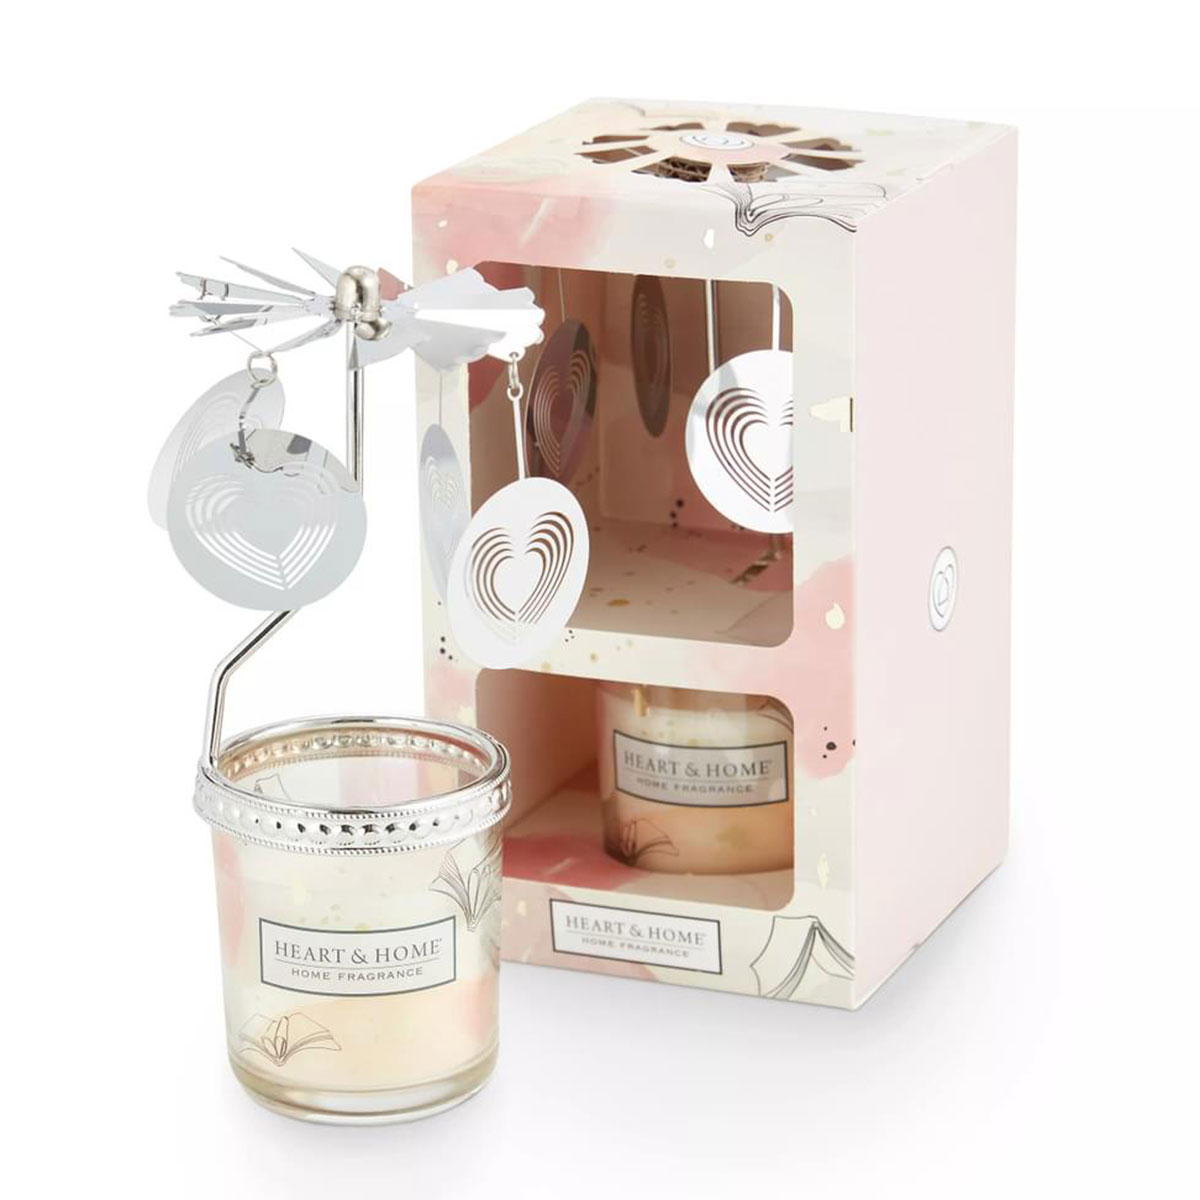 Heart and Home Love Story small candle gift box with Carrousel